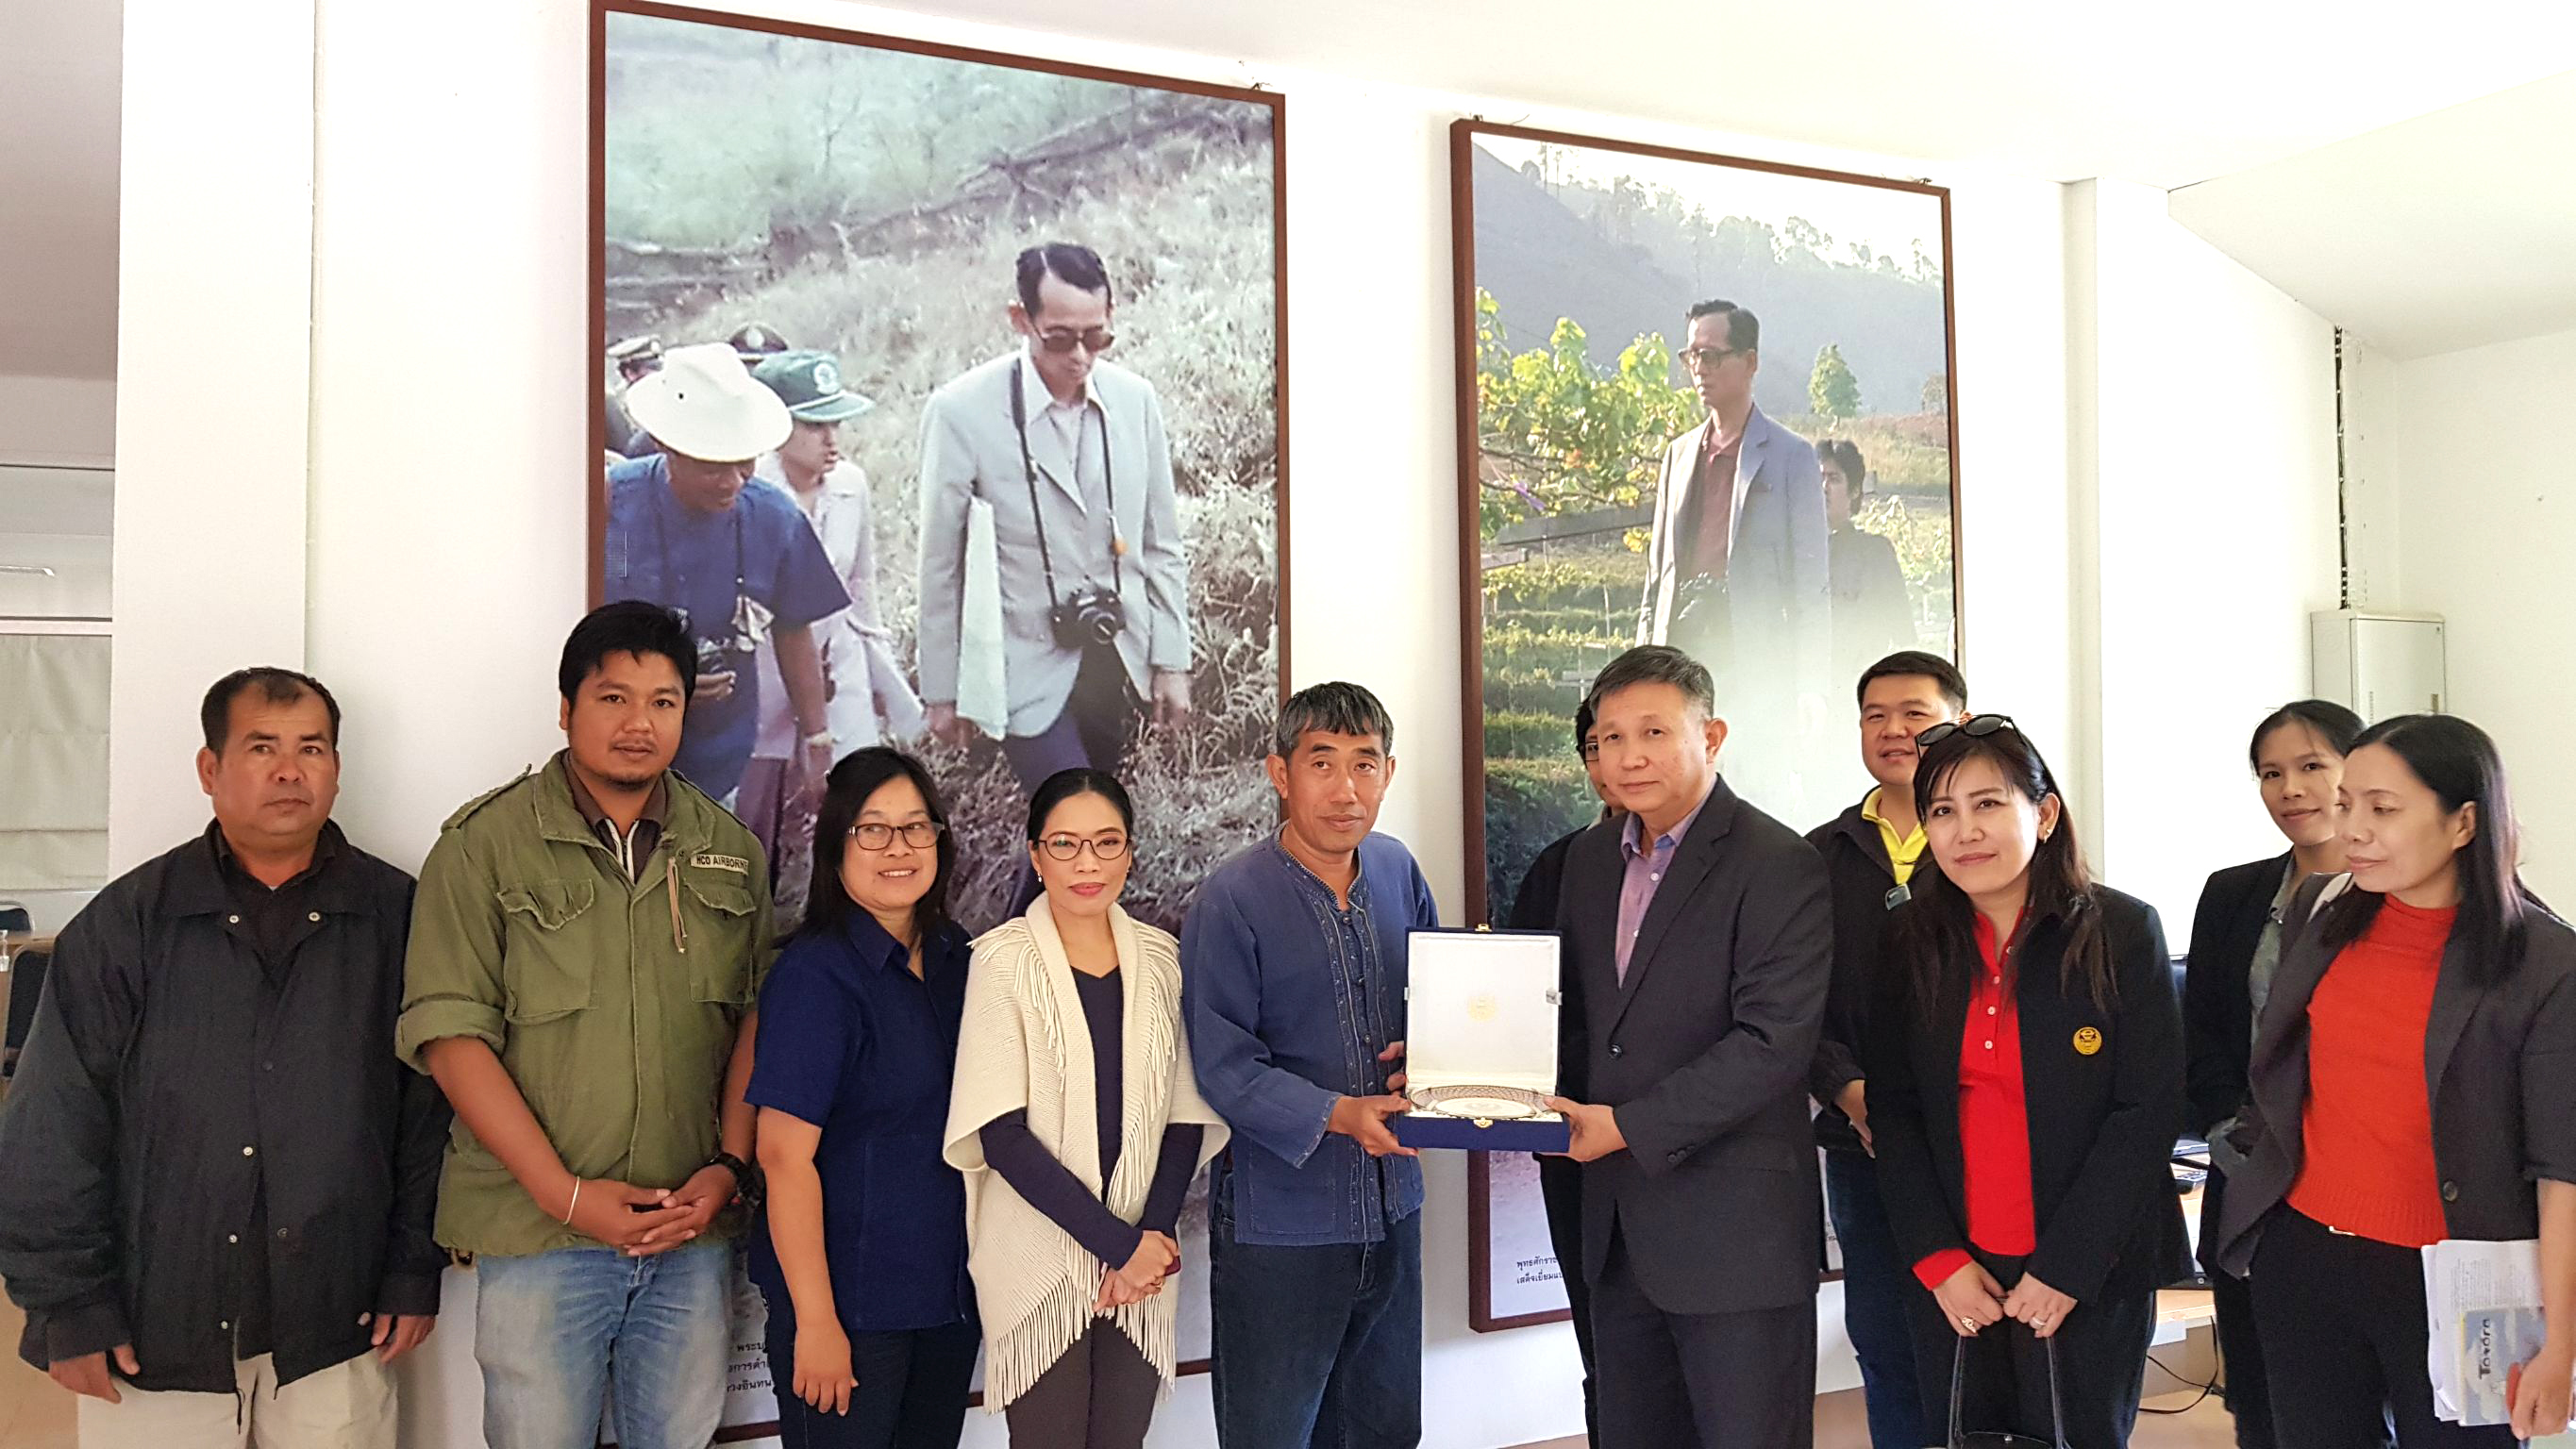 30 January 2019, at the Royal Agricultural Station Inthanon, Chiang Mai Province